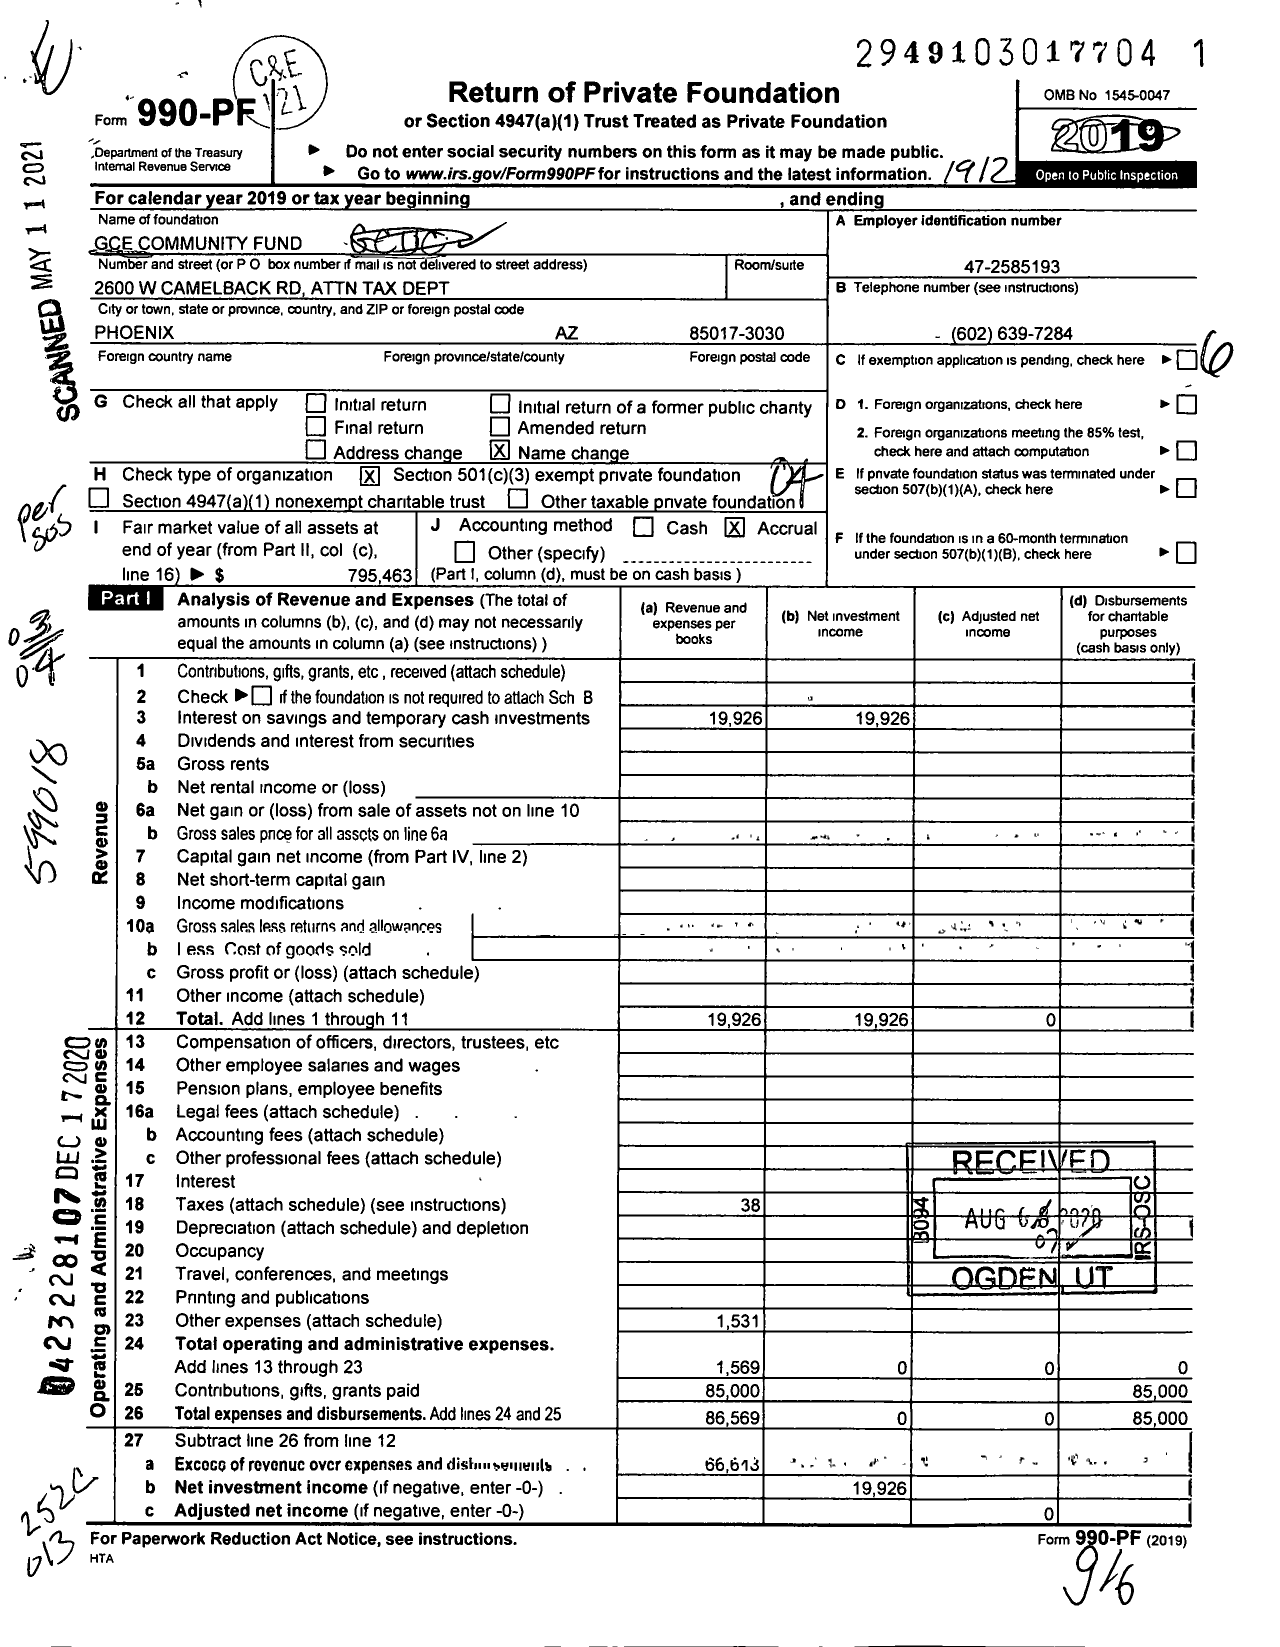 Image of first page of 2019 Form 990PF for Gce Community Fund